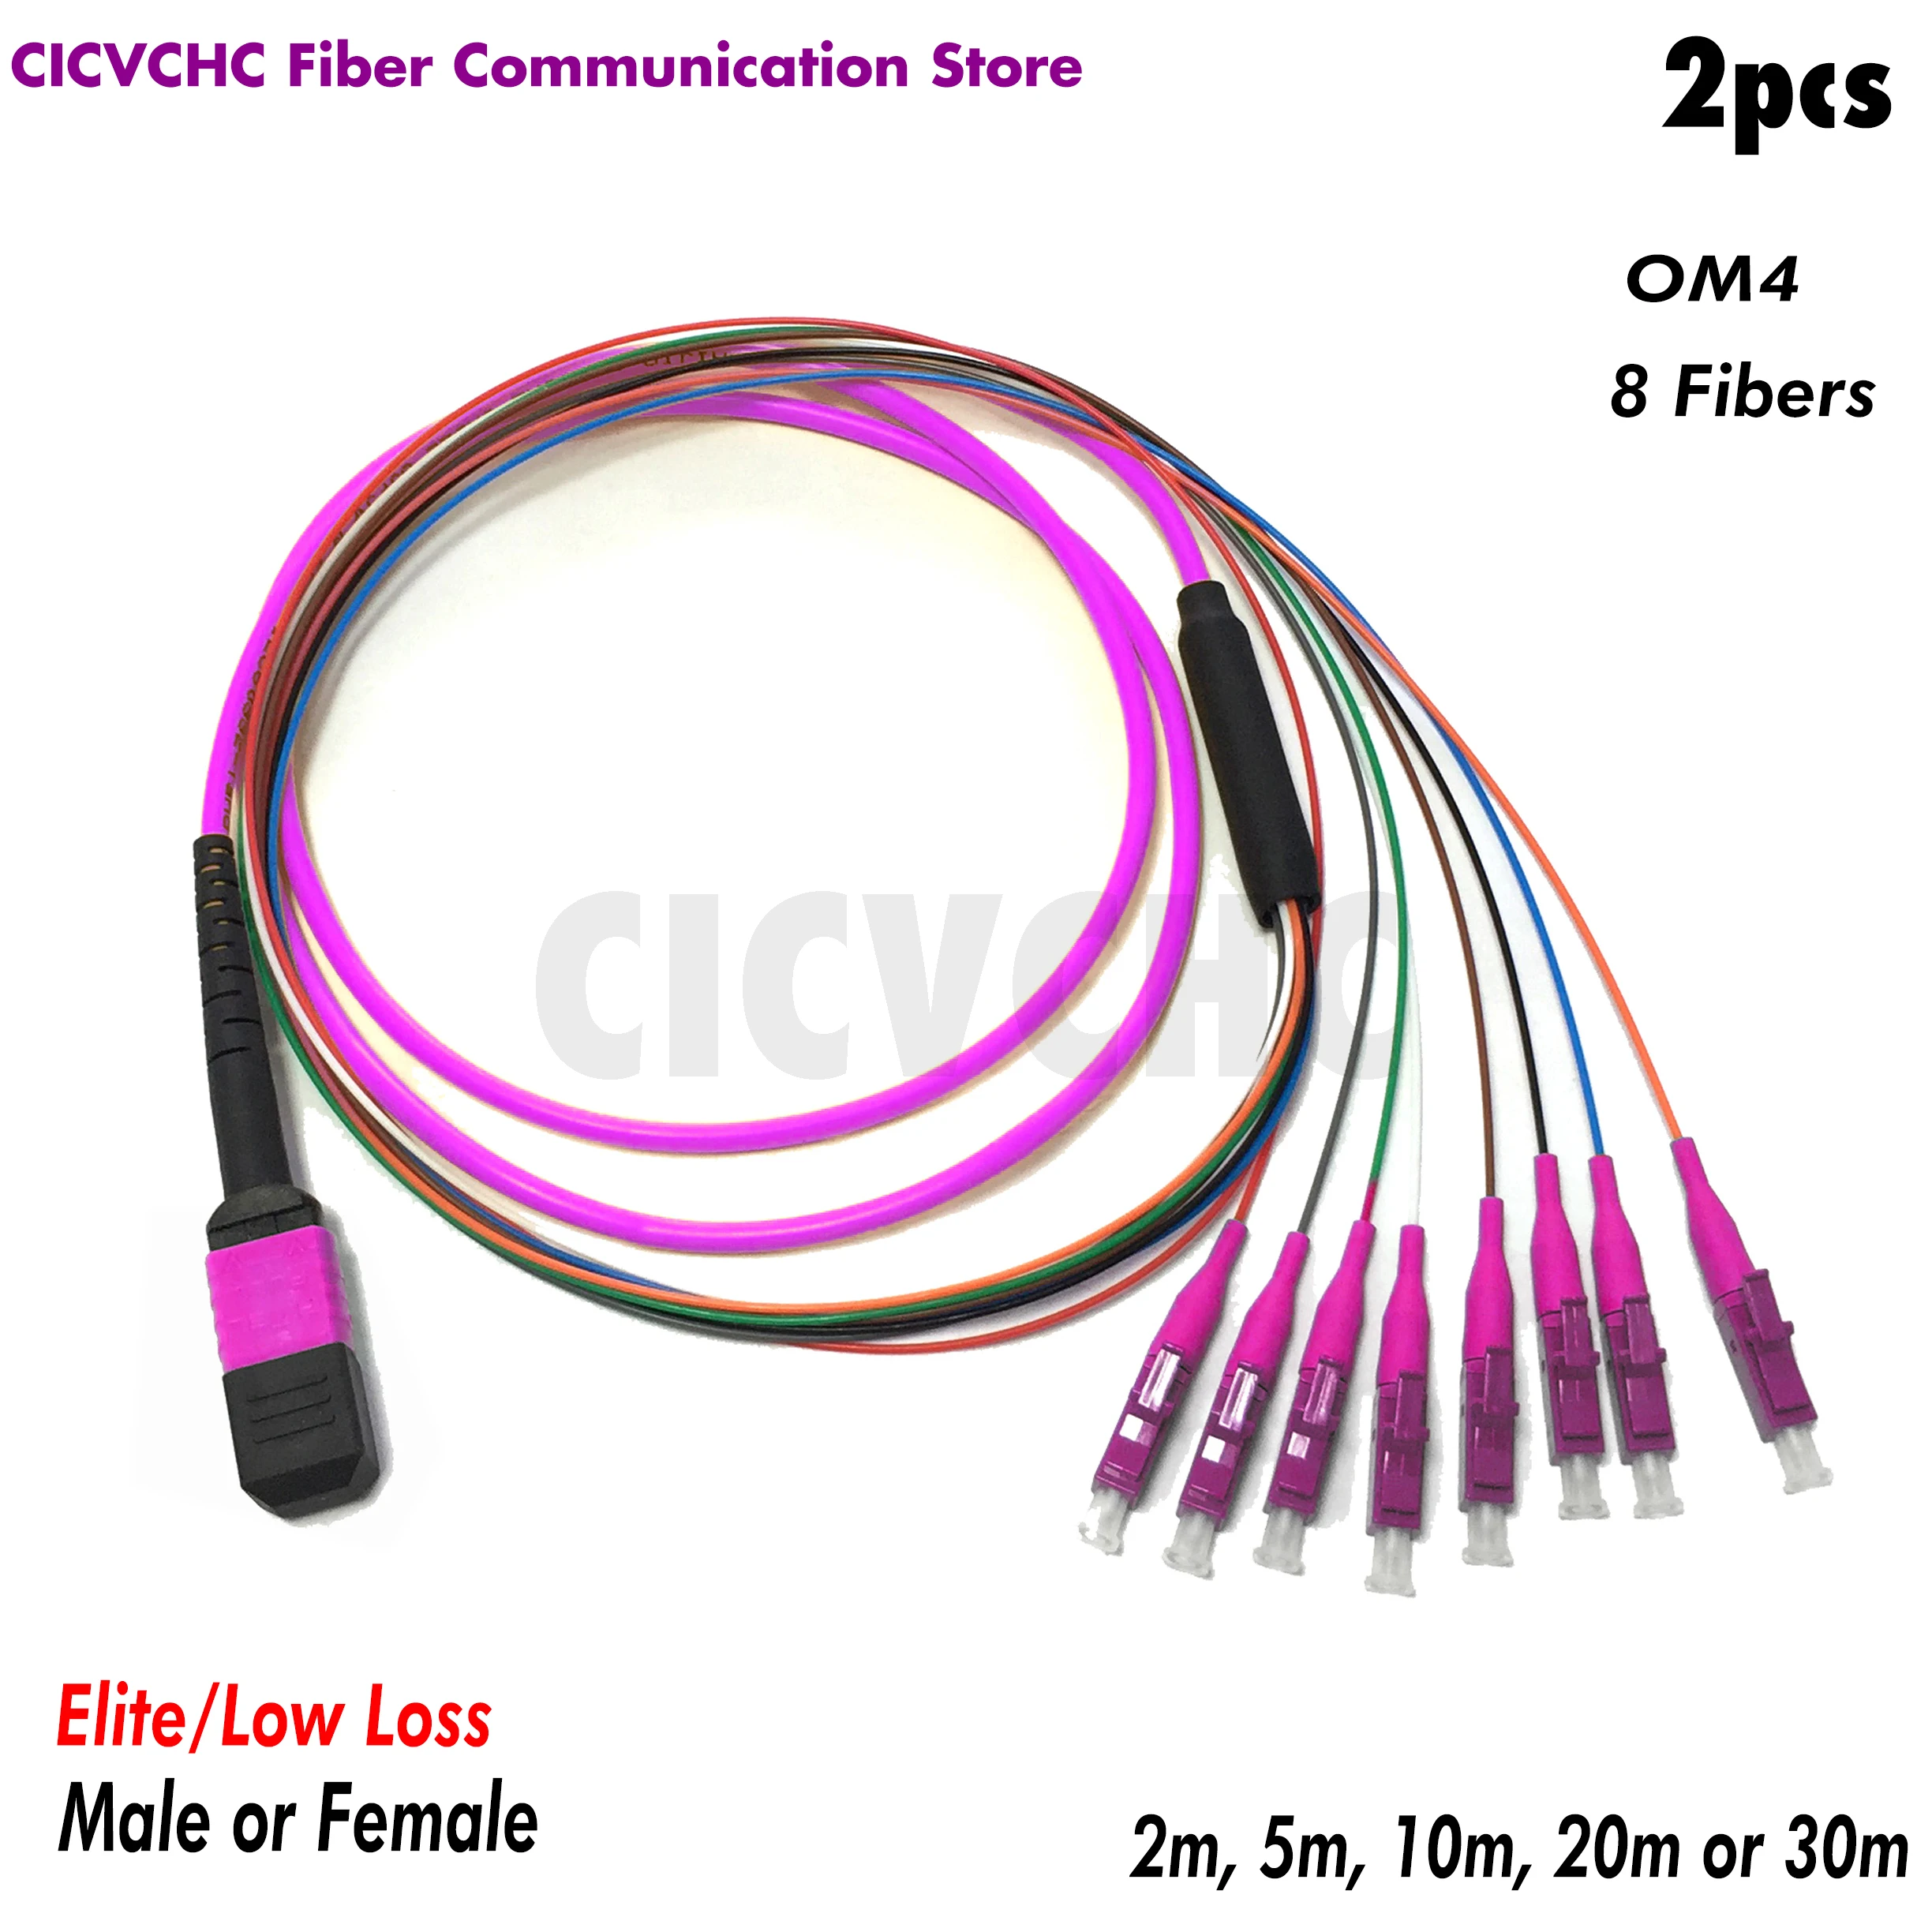 superbat hsd cable assembly fakra b coding right angle female to fakra b coding straight male dacar 535 4pole 2pcs 8 fibers-MPO/UPC Fanout LC/UPC -OM4-Elite/Low loss-Male/Female with 0.9mm-2m to 30m/MPO Assembly